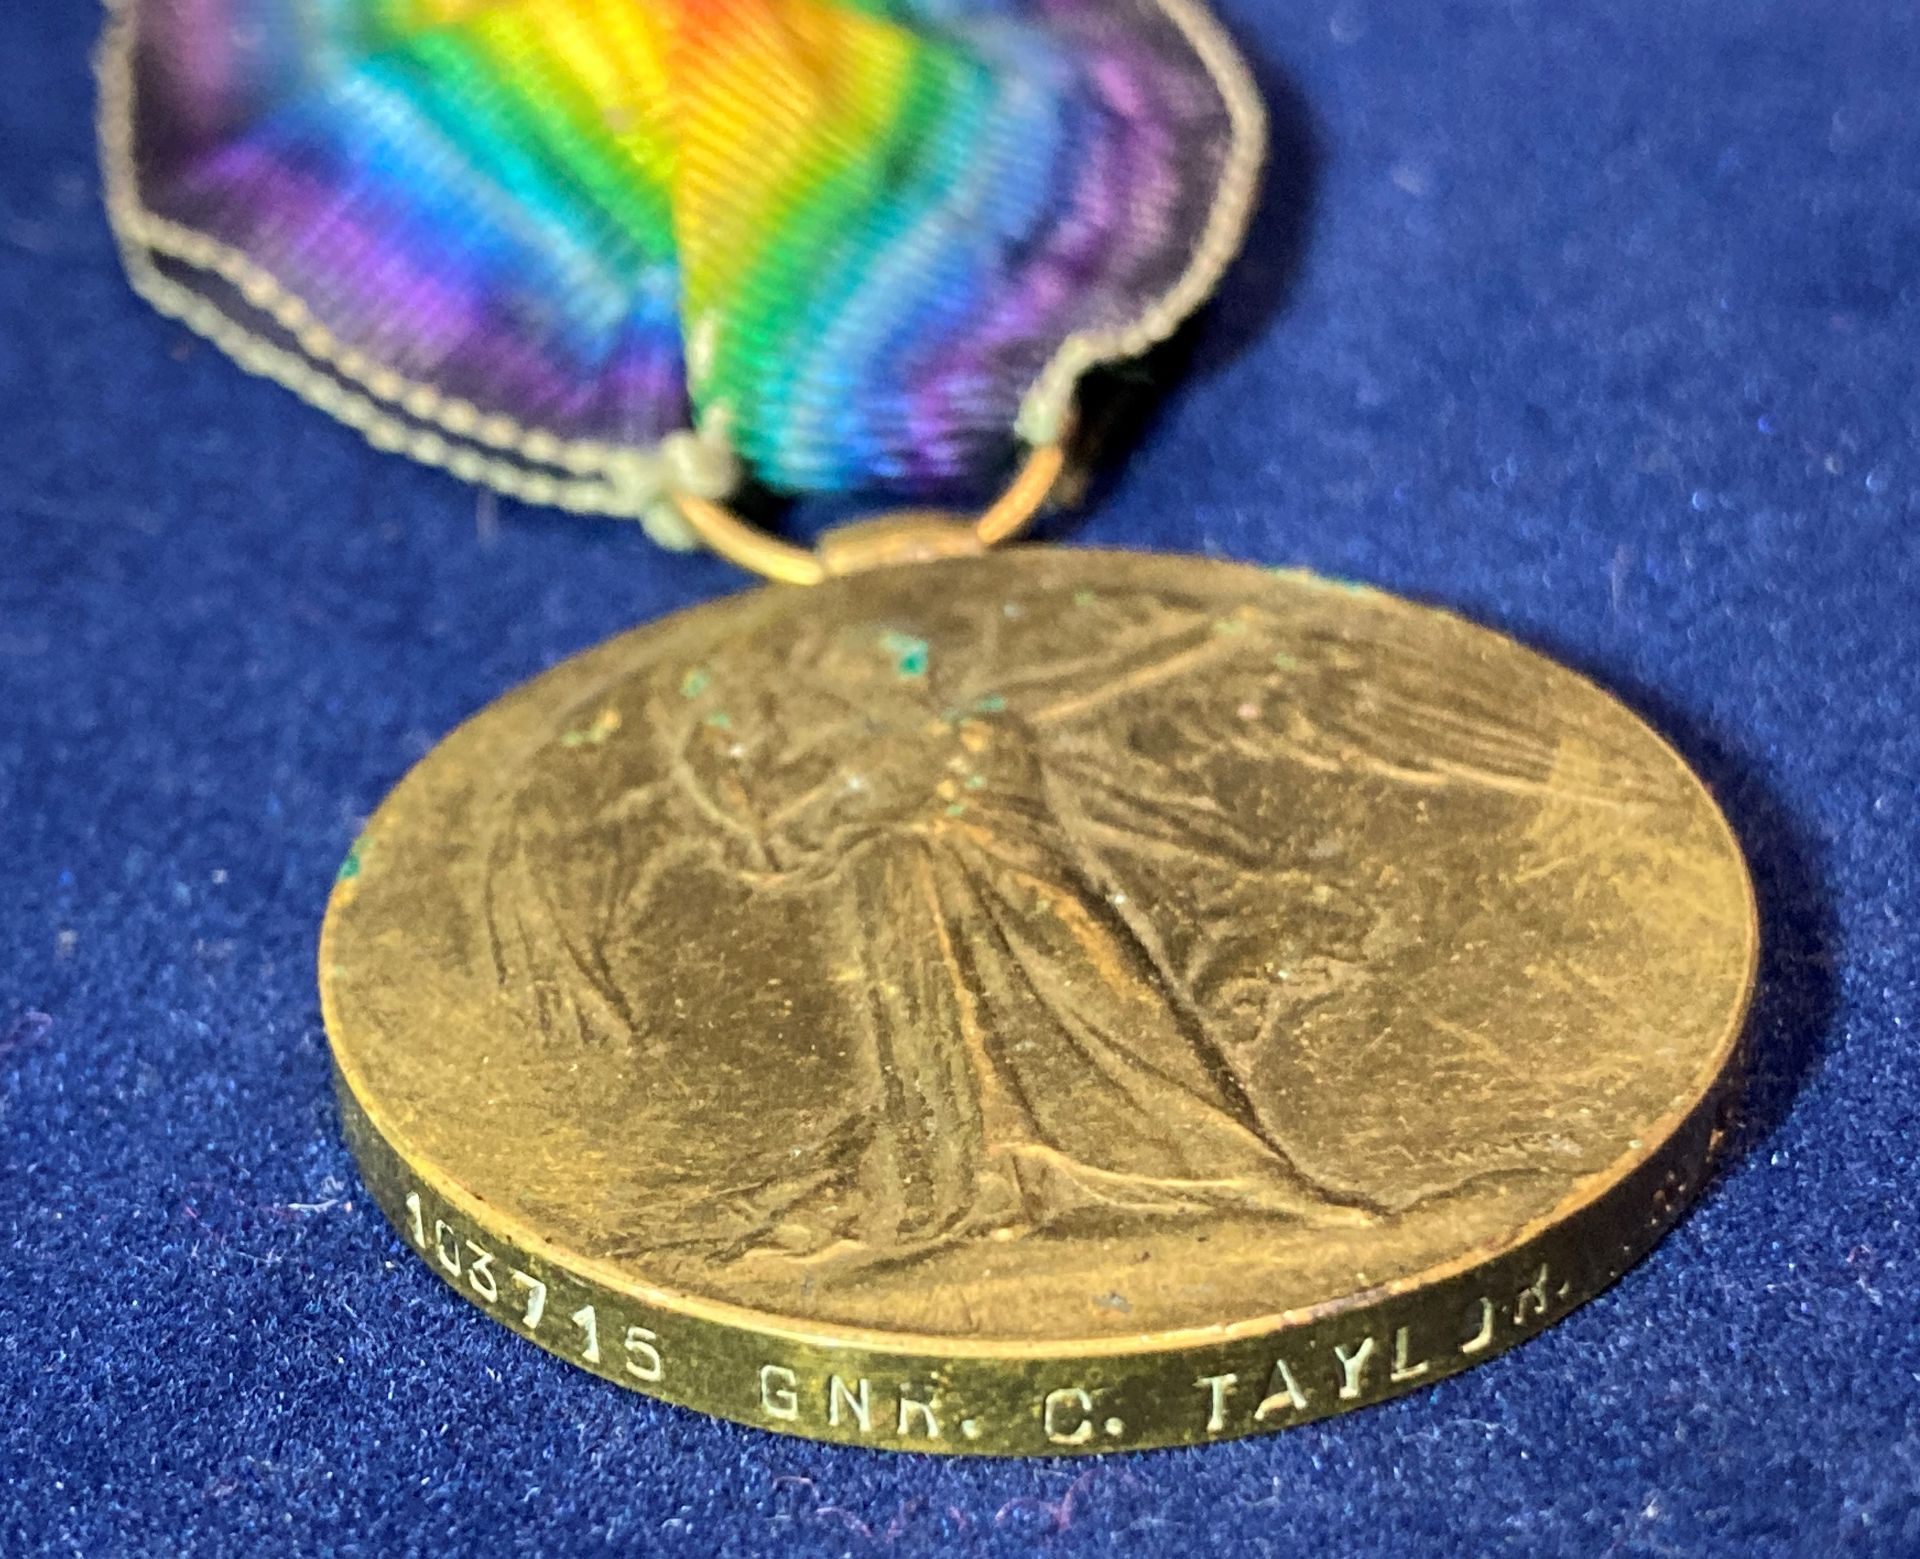 Two First World War Medals - 1914-1918 British War Medal and 1914-1919 Victory Medal both with - Image 3 of 3